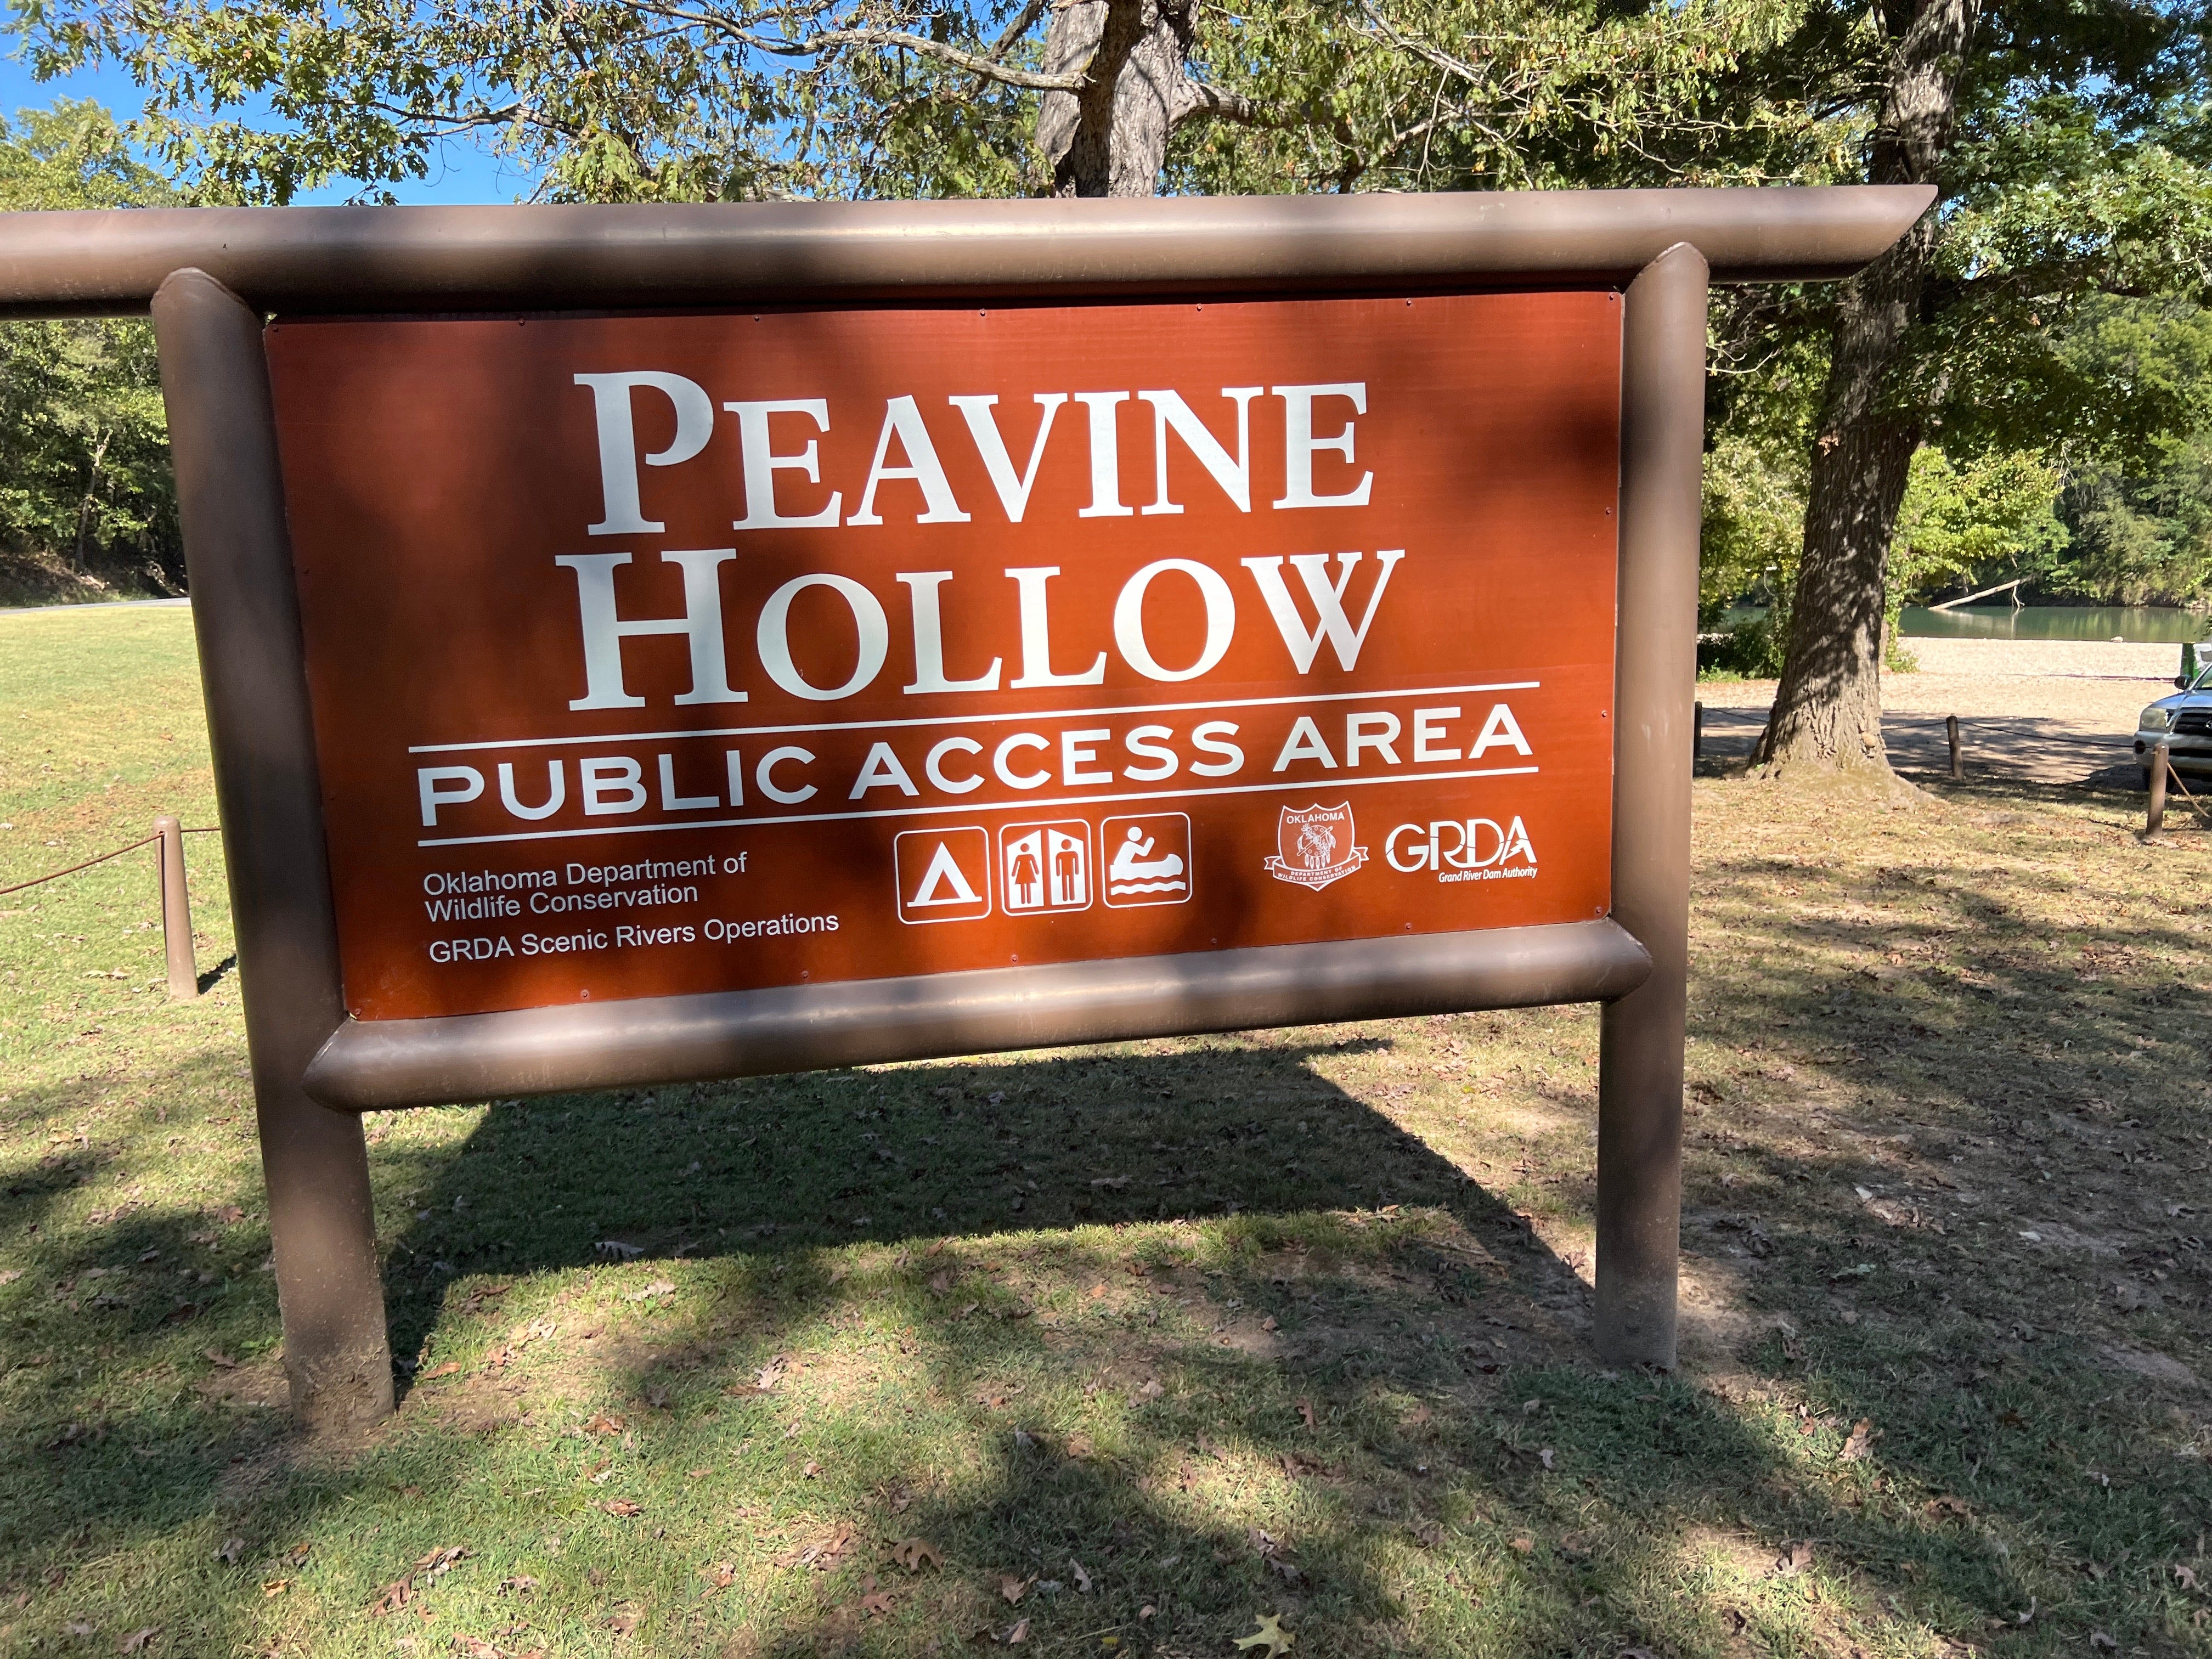 Camper submitted image from Peavine Hollow Public Access Area - 3